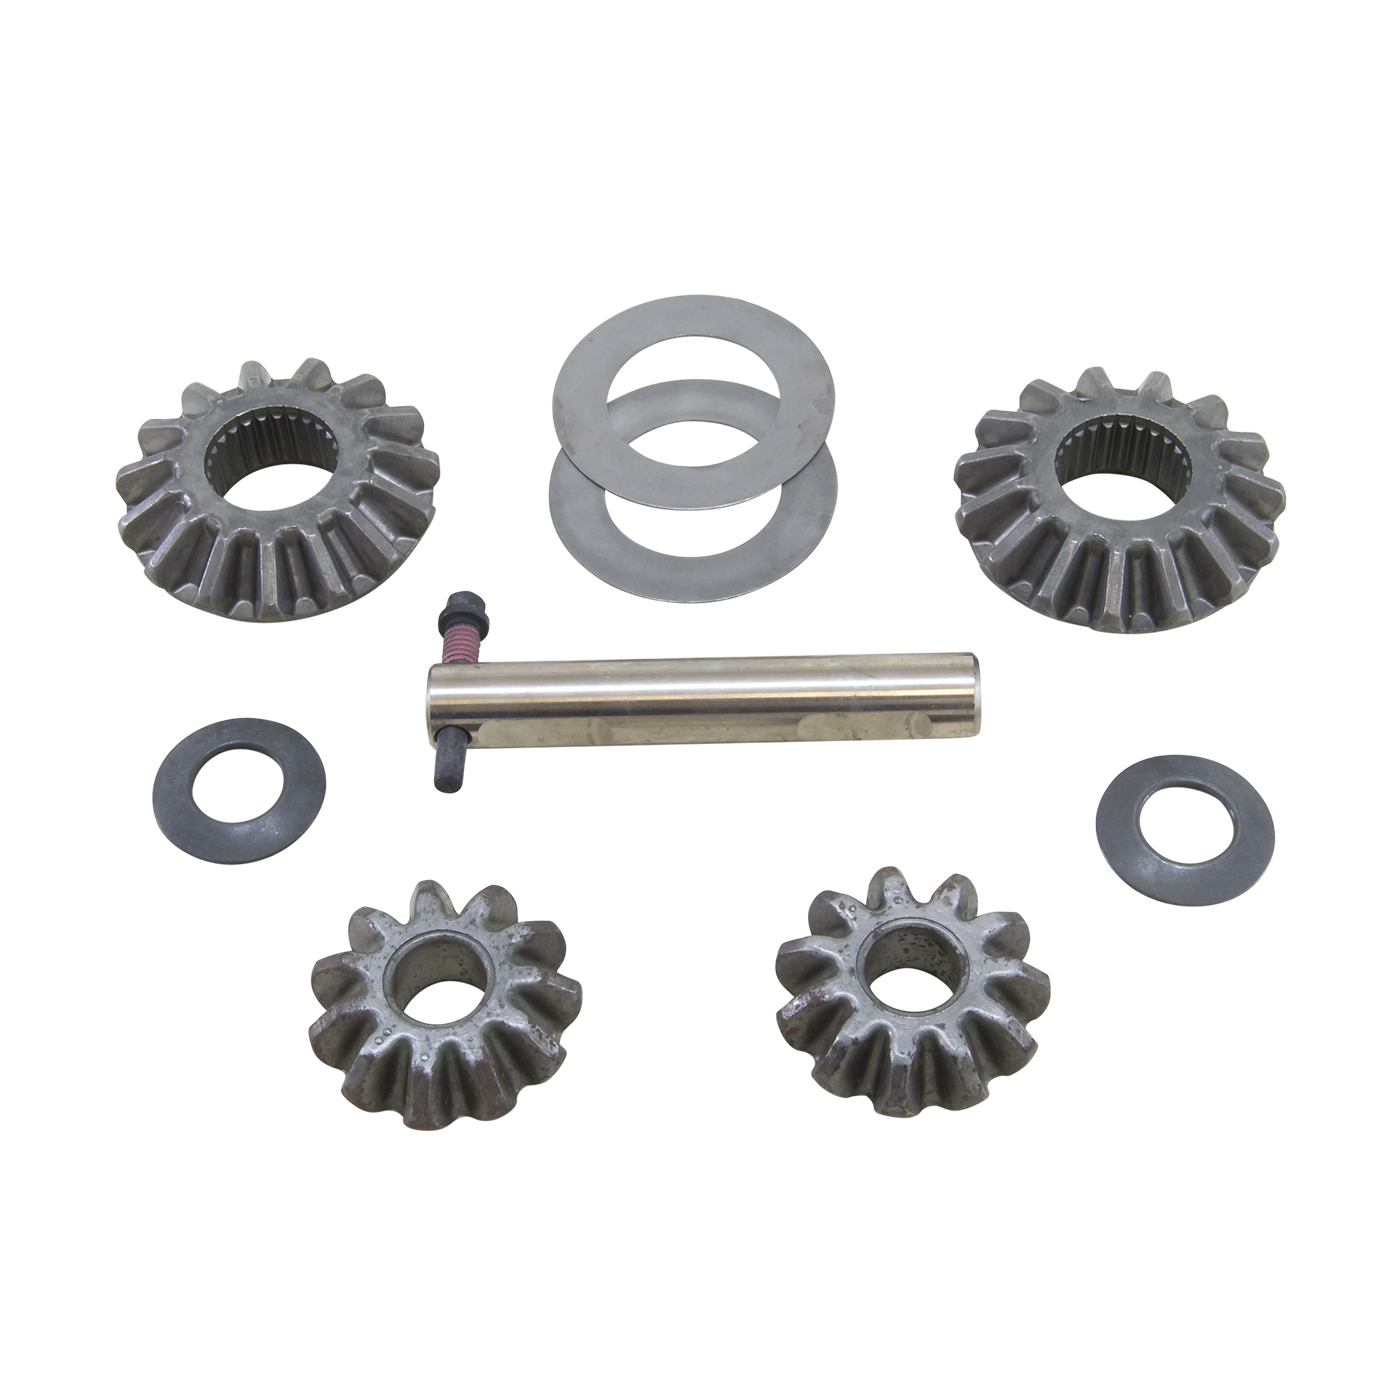 Standard Open Spider Gear Kit For GM 7.2 in. S10 And S15 Ifs